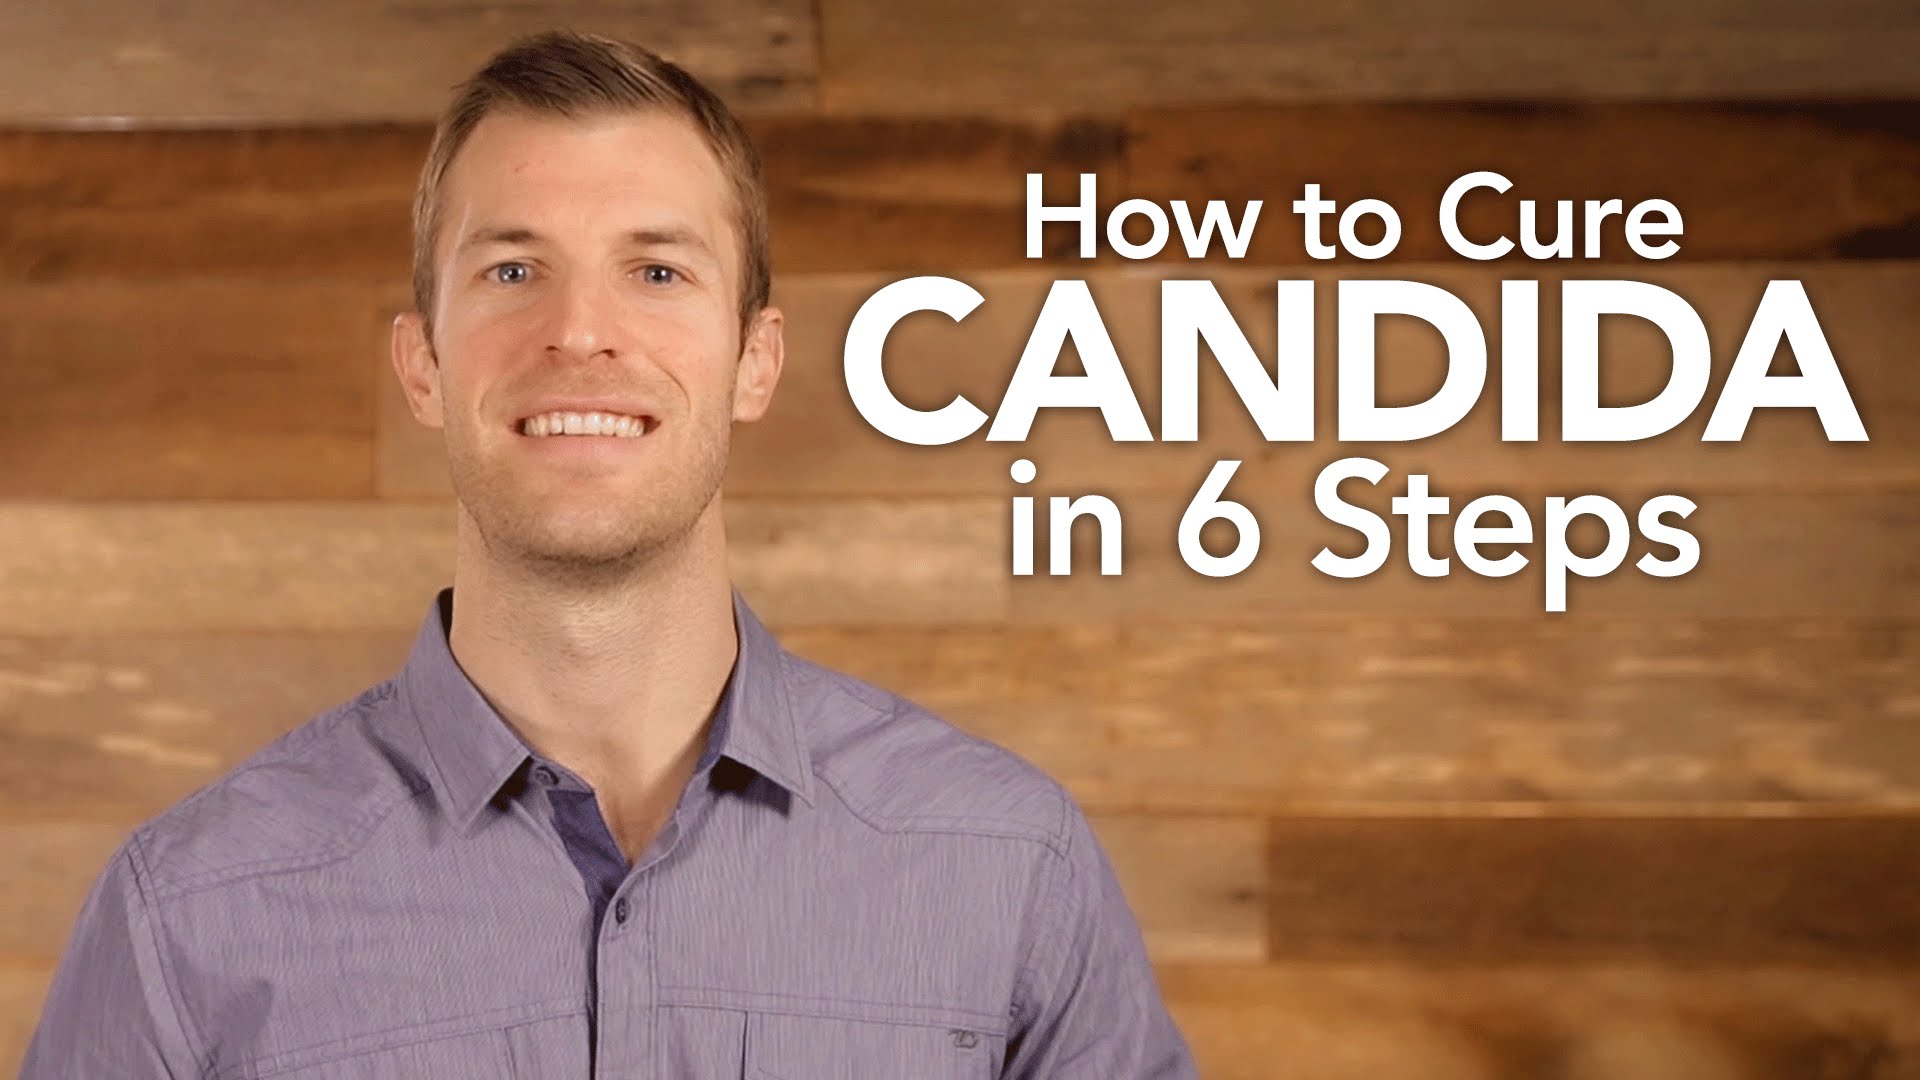 6 Steps To Treat Candida